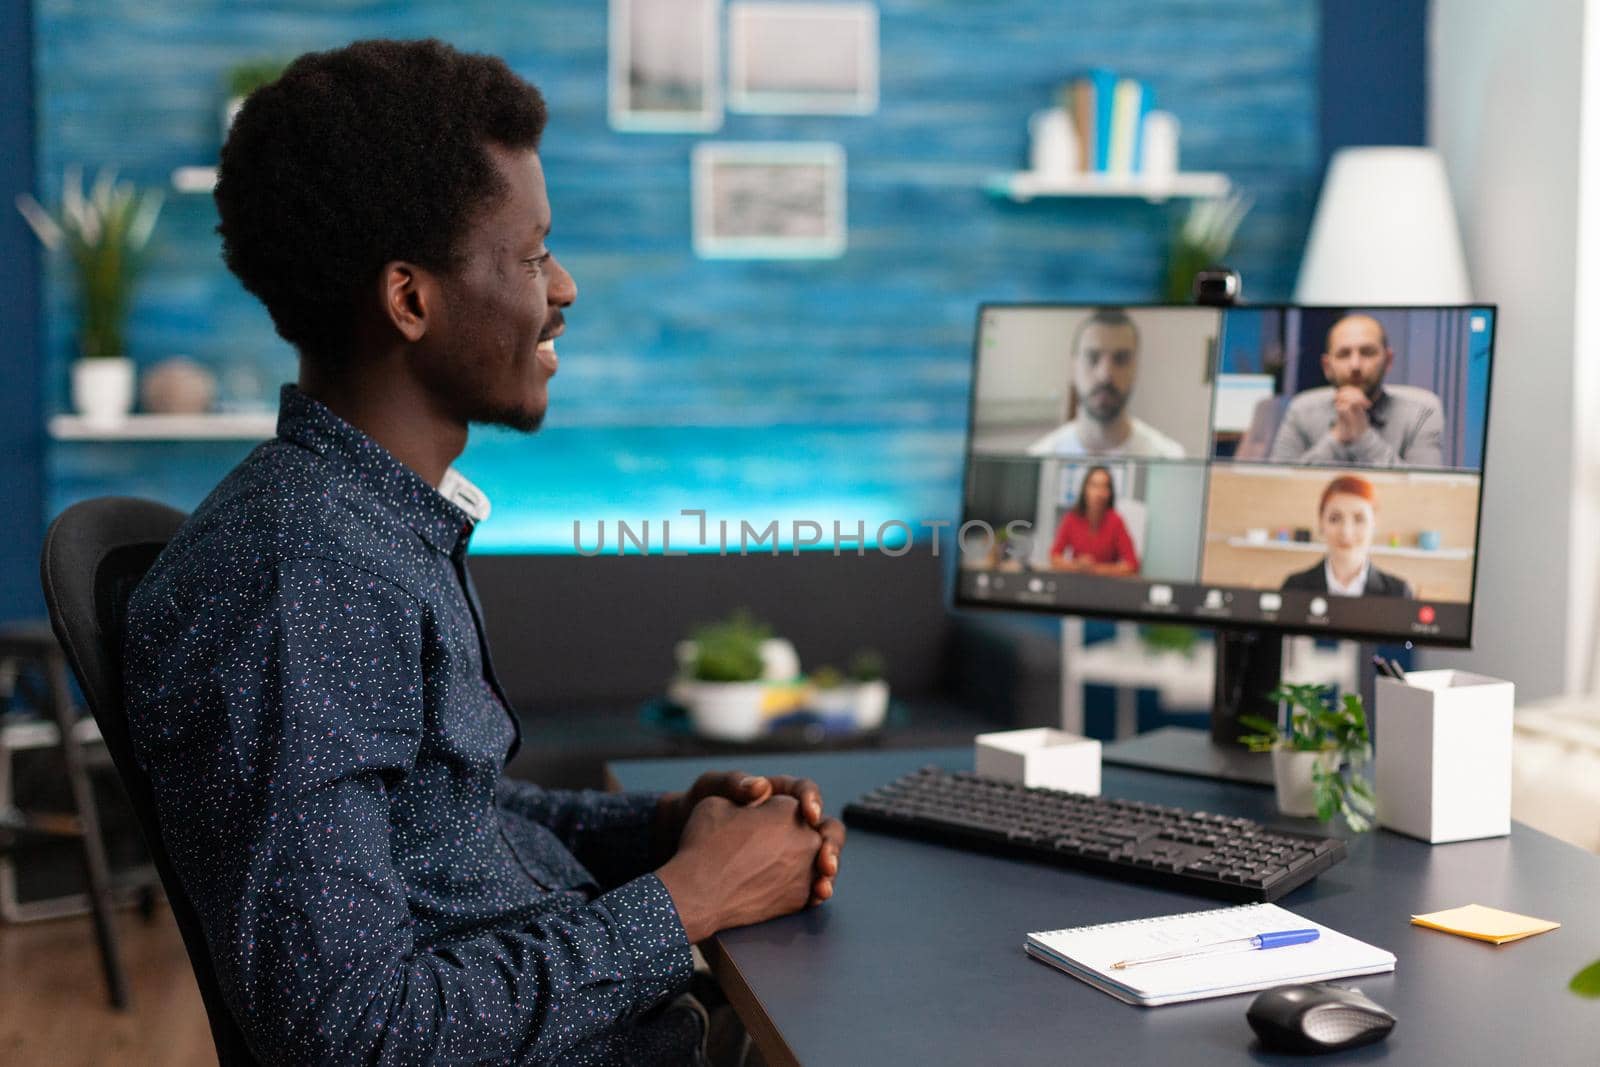 Black man doing online conference video call to talk via internet with colleagues while working from home. African american person remote worker at desk using computer technology